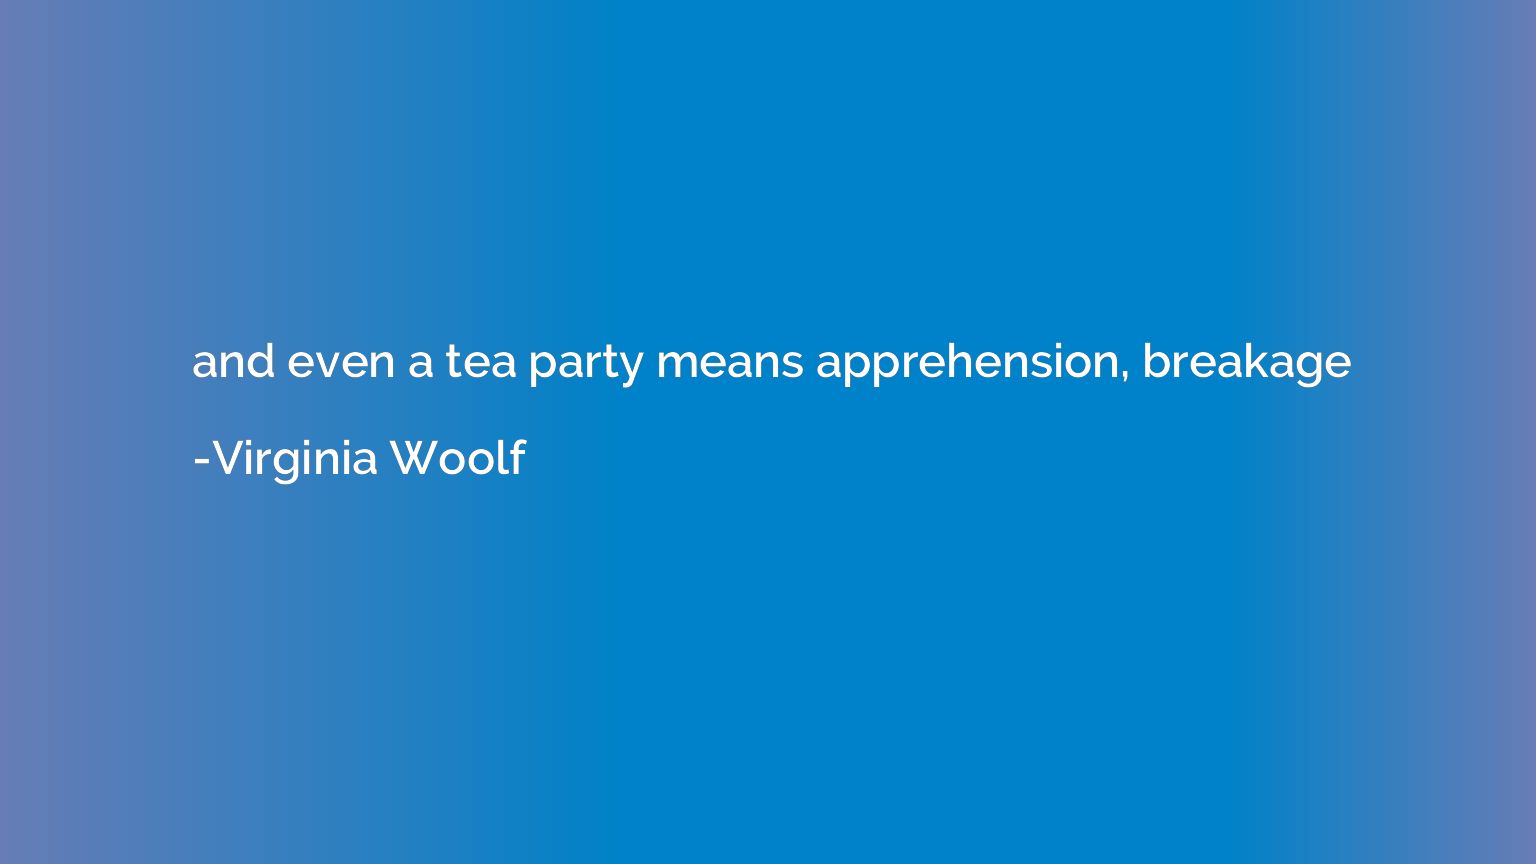 and even a tea party means apprehension, breakage